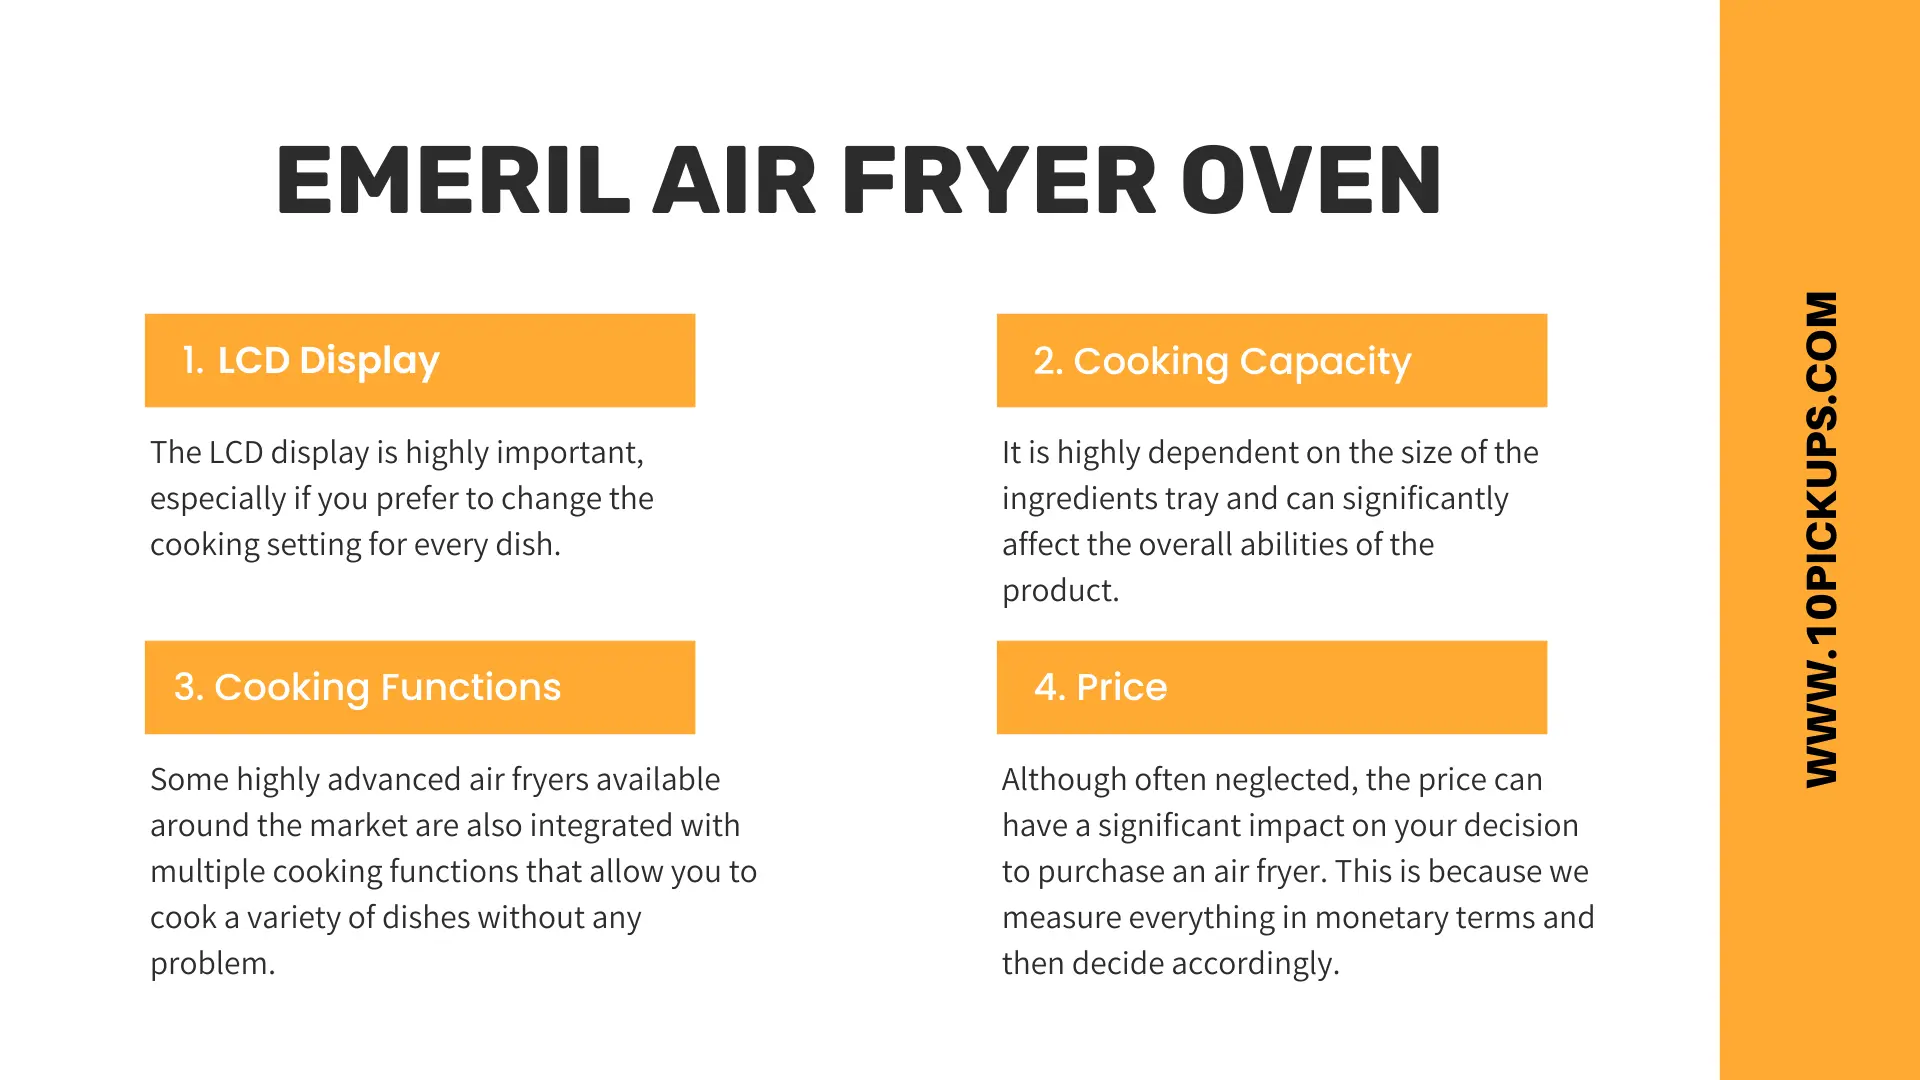 Factors to Consider While Purchasing the Emeril Air Fryer Oven